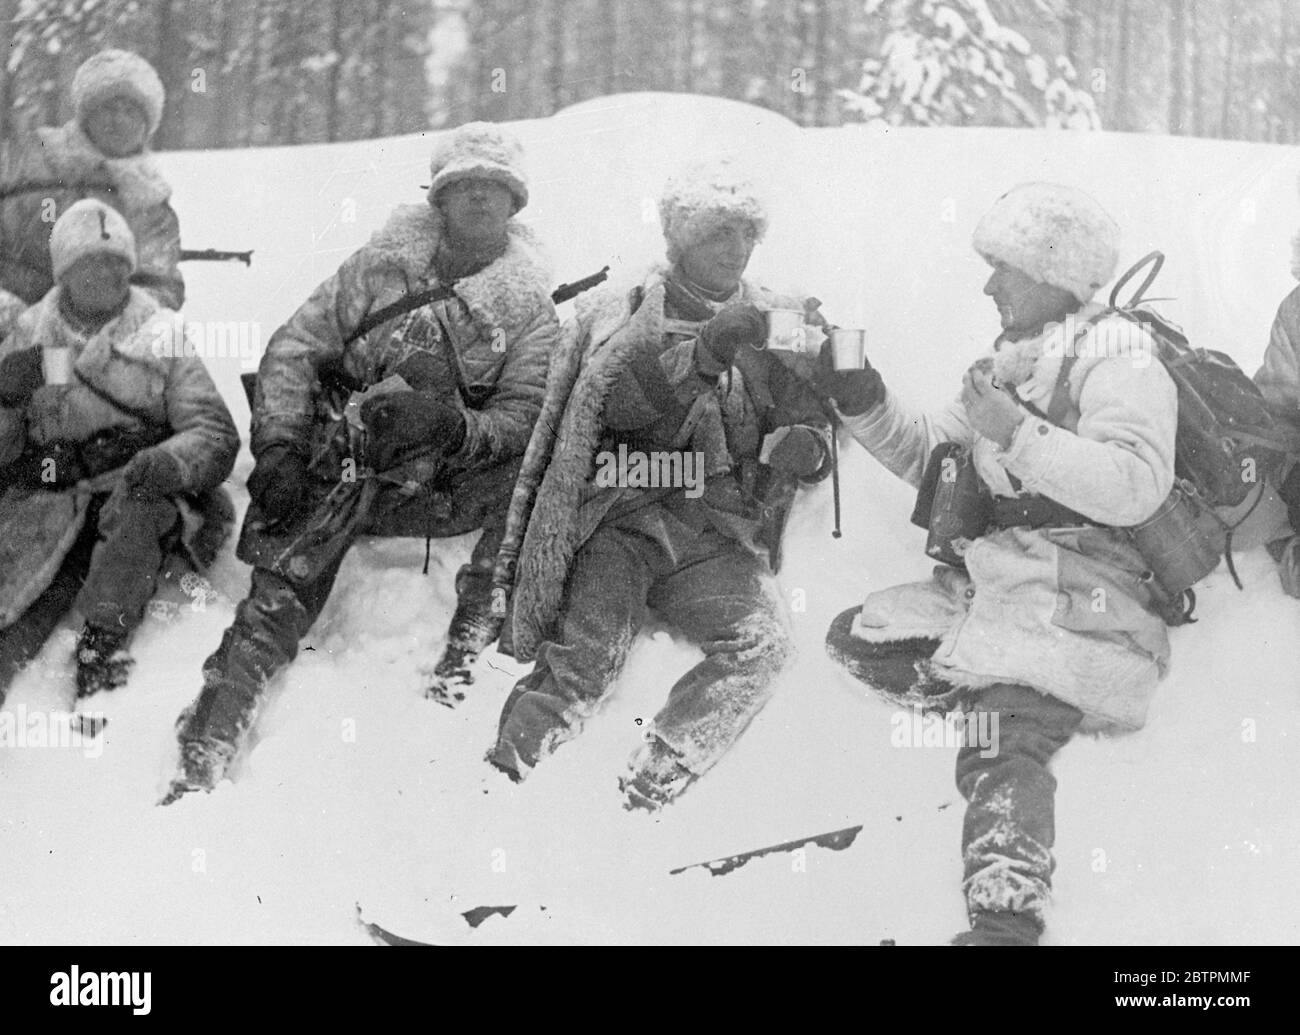 Soldiers in furs . Swedish army on manoeuvres in snowy wastes of lapland . The Swedish Army is being severly tested under hard winter conditions in the Boden district of lapland . The exercises are attended by Crown Prince , Gustav Adolf . The entire infantry forces are equipped with skis and most of the artillery with sledges . Furs are the predominating uniform . Photo shows , fur clad Swedish soldiers taking hot drinks as they rest in the snow of the ' battlefield ' at Boden , Lapland . 11 March 1937 Stock Photo